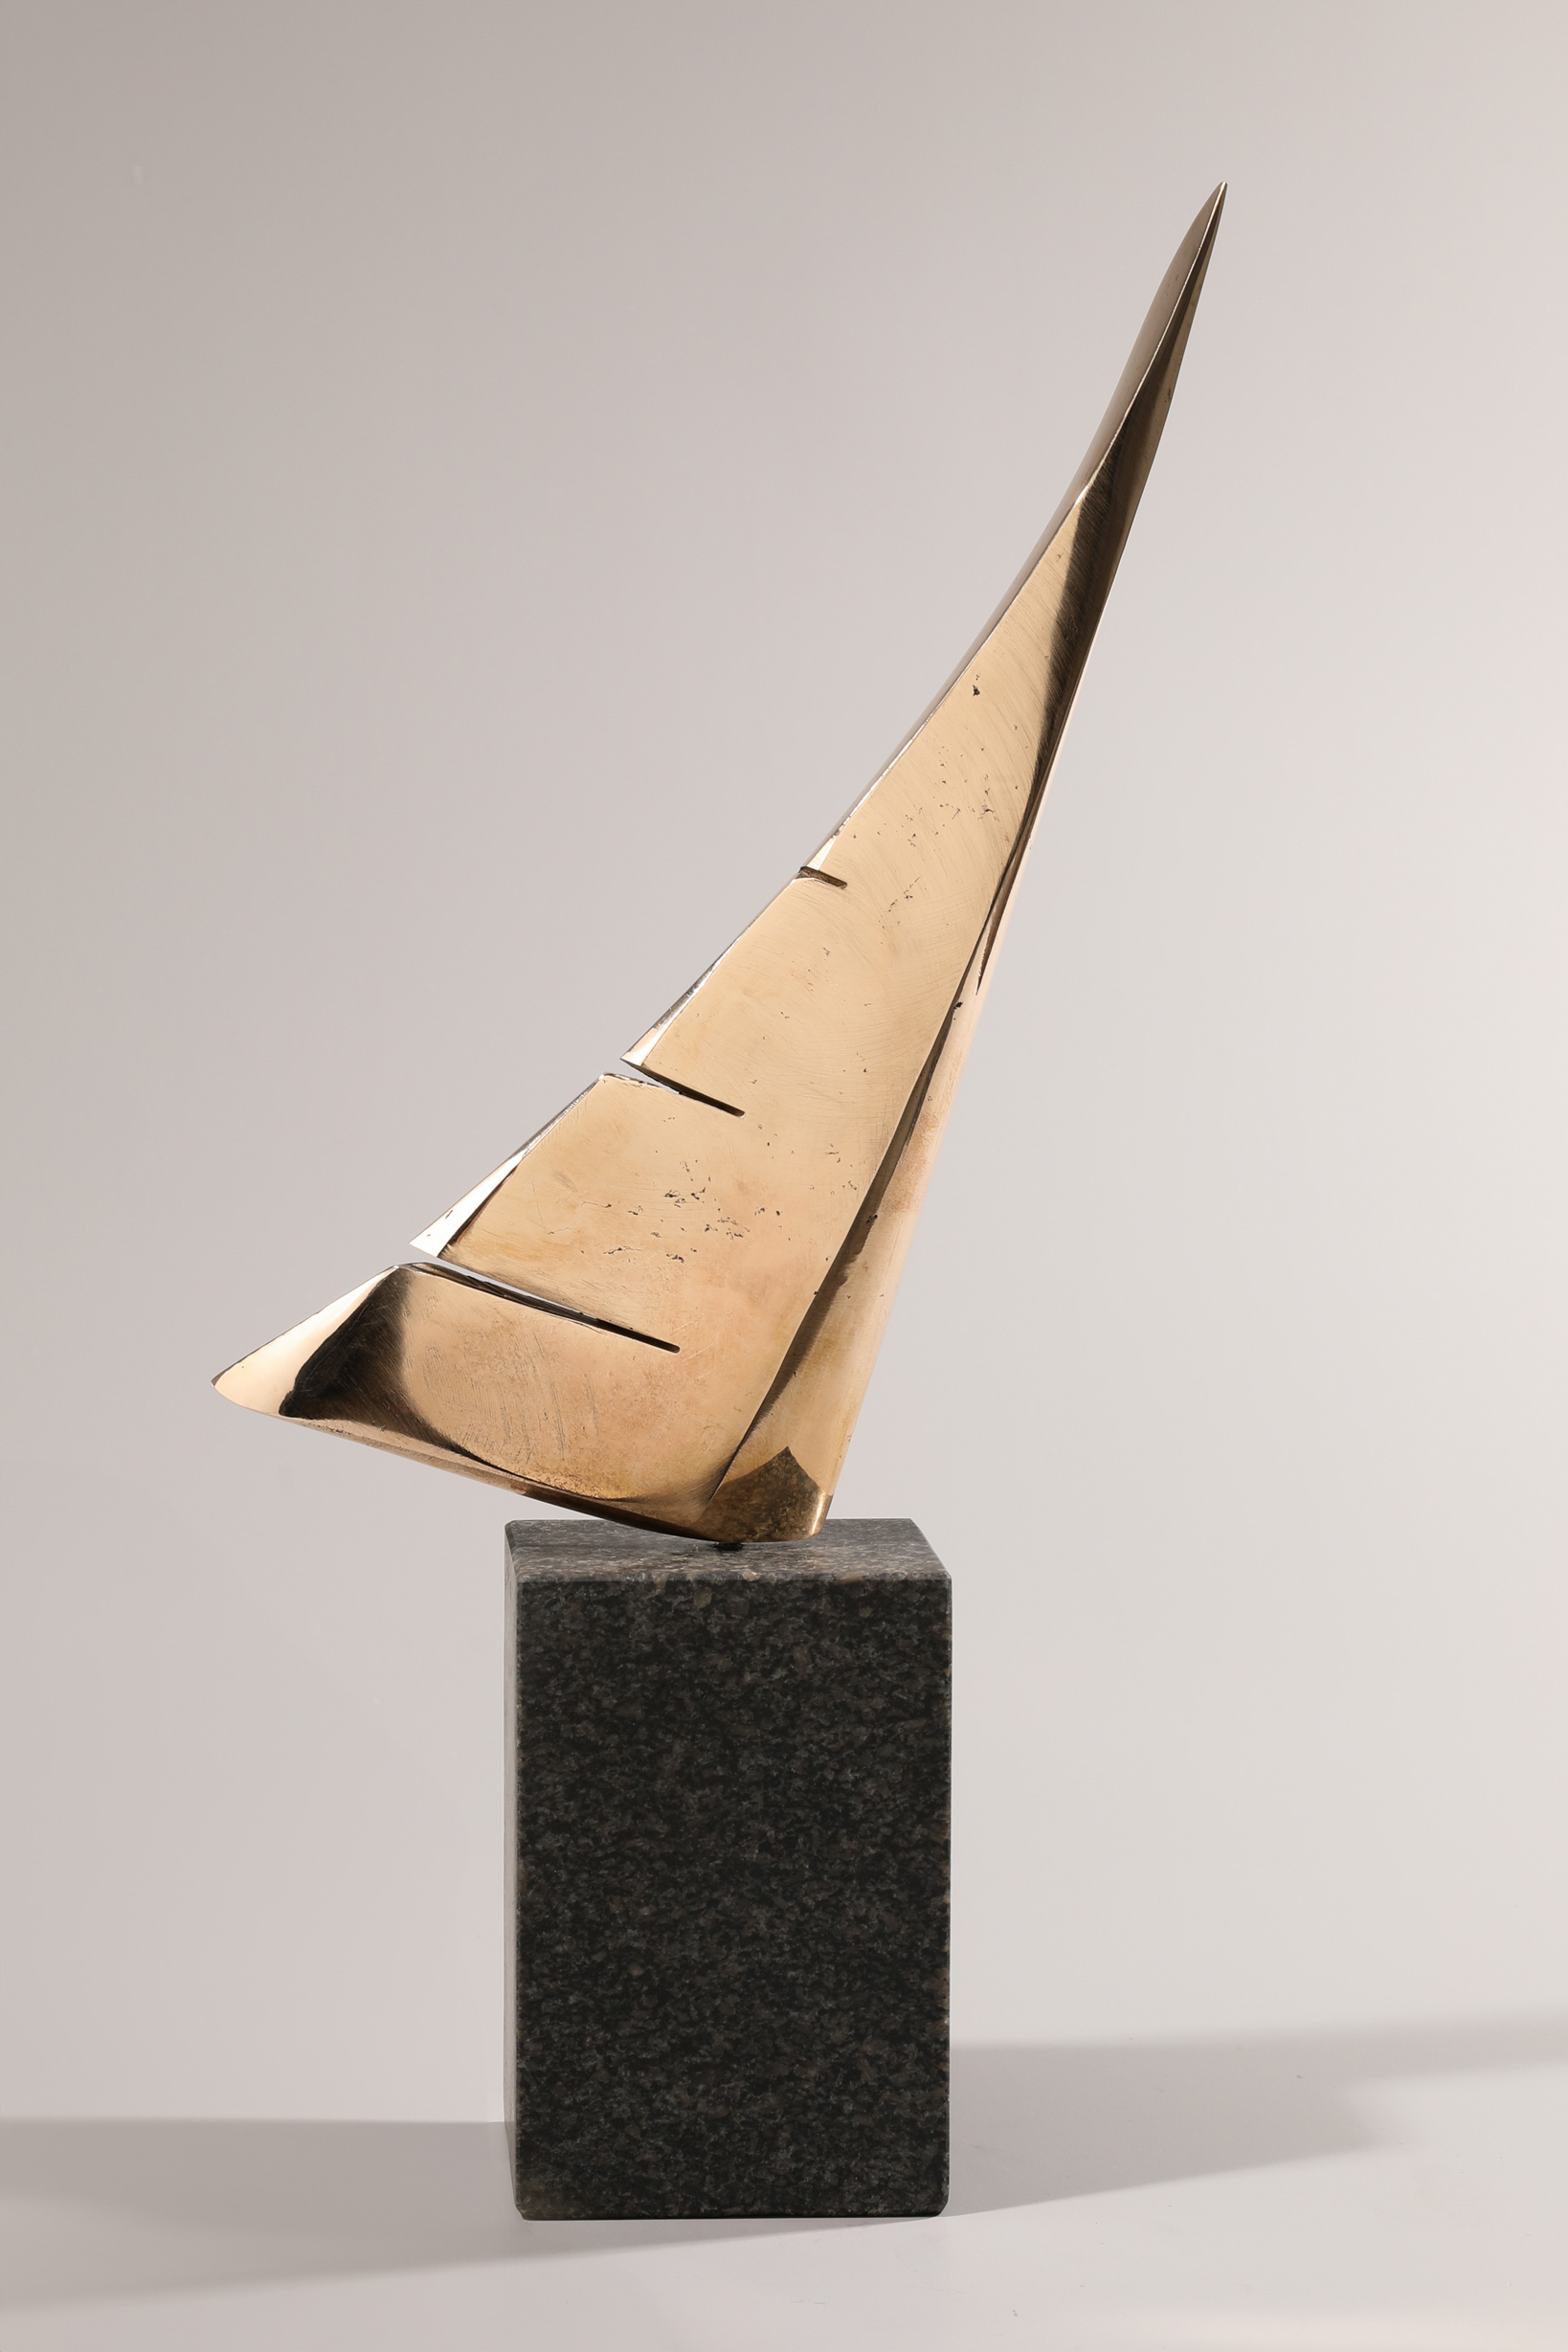 Chrysanthus Helmers, Sculpture Sail, 2018, Ed. 15 - Image 4 of 5